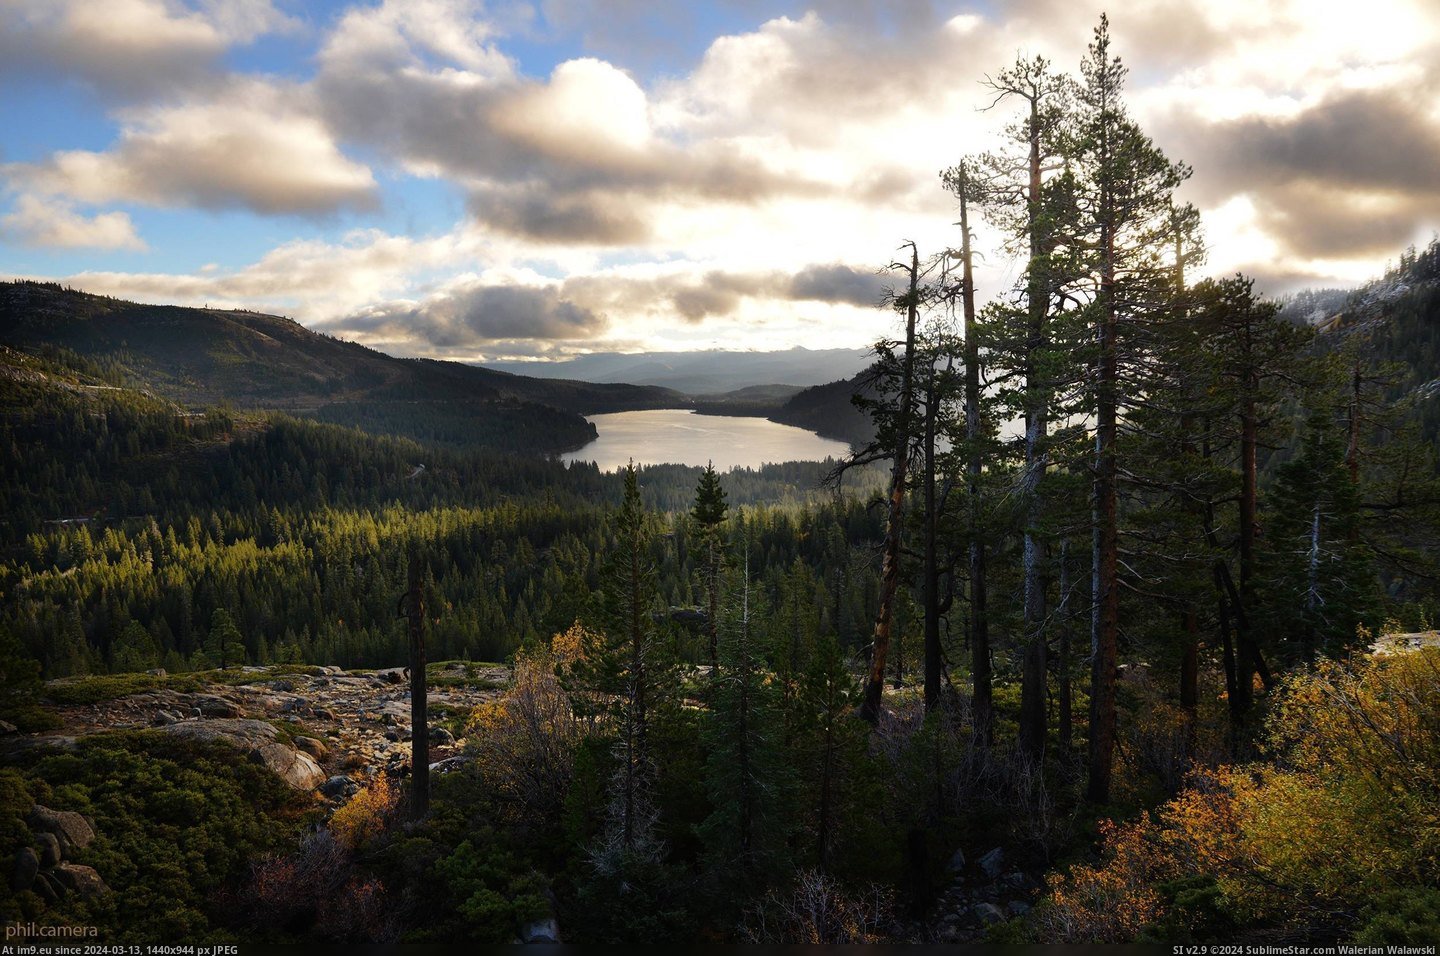 #Lake #Light #Sierras #Donner #Gorgeous #Summit [Earthporn] Gorgeous light in the Sierras yesterday near Donner Summit, looking down at Donner Lake [2500x1651][oc] Pic. (Image of album My r/EARTHPORN favs))